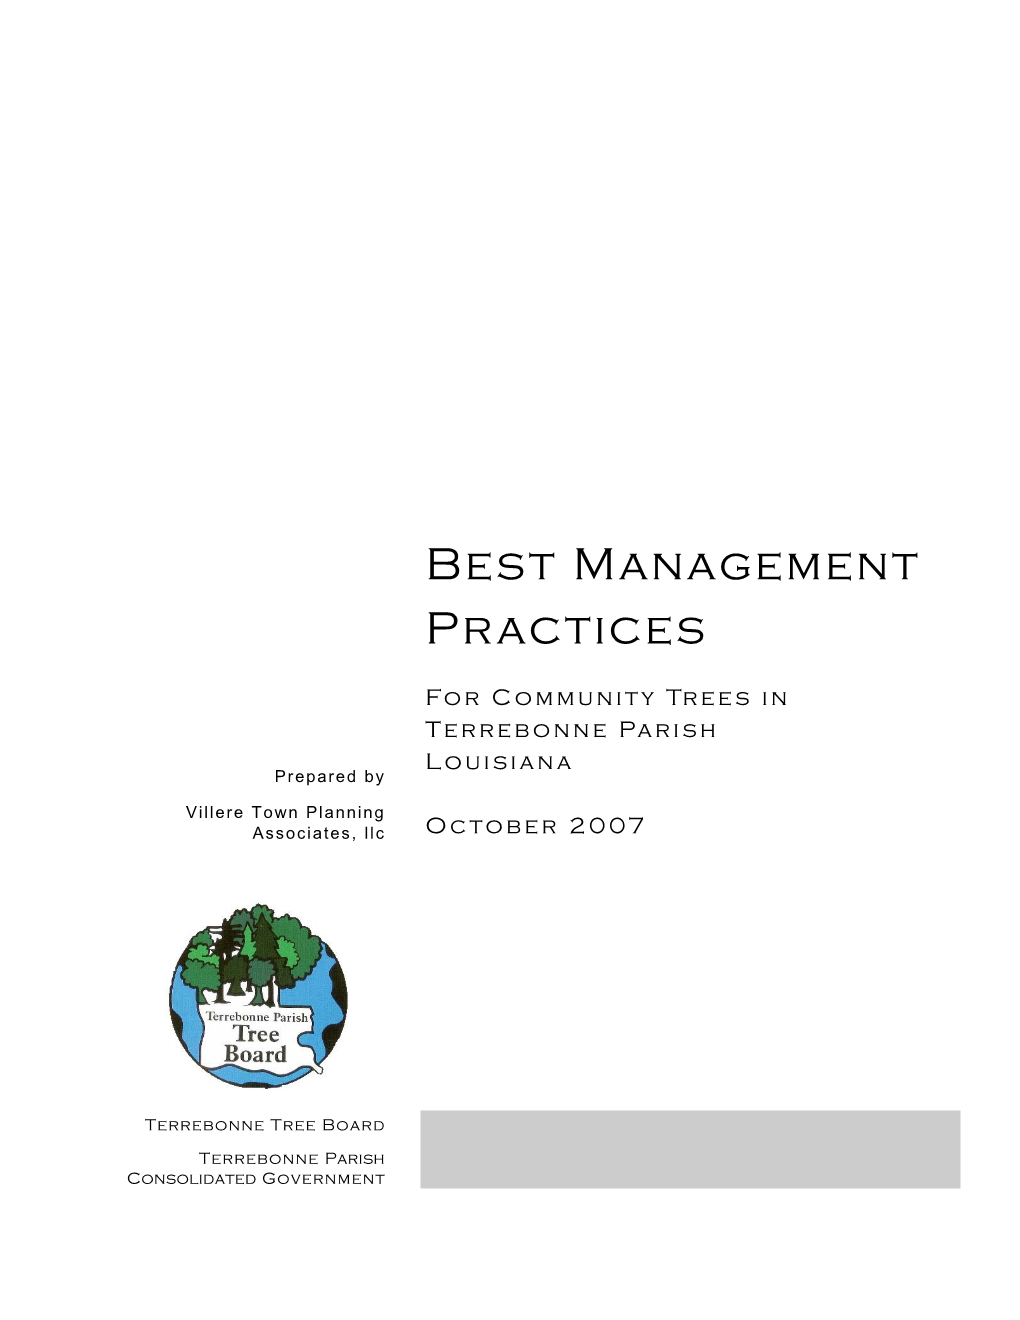 Best Management Practices for Trees